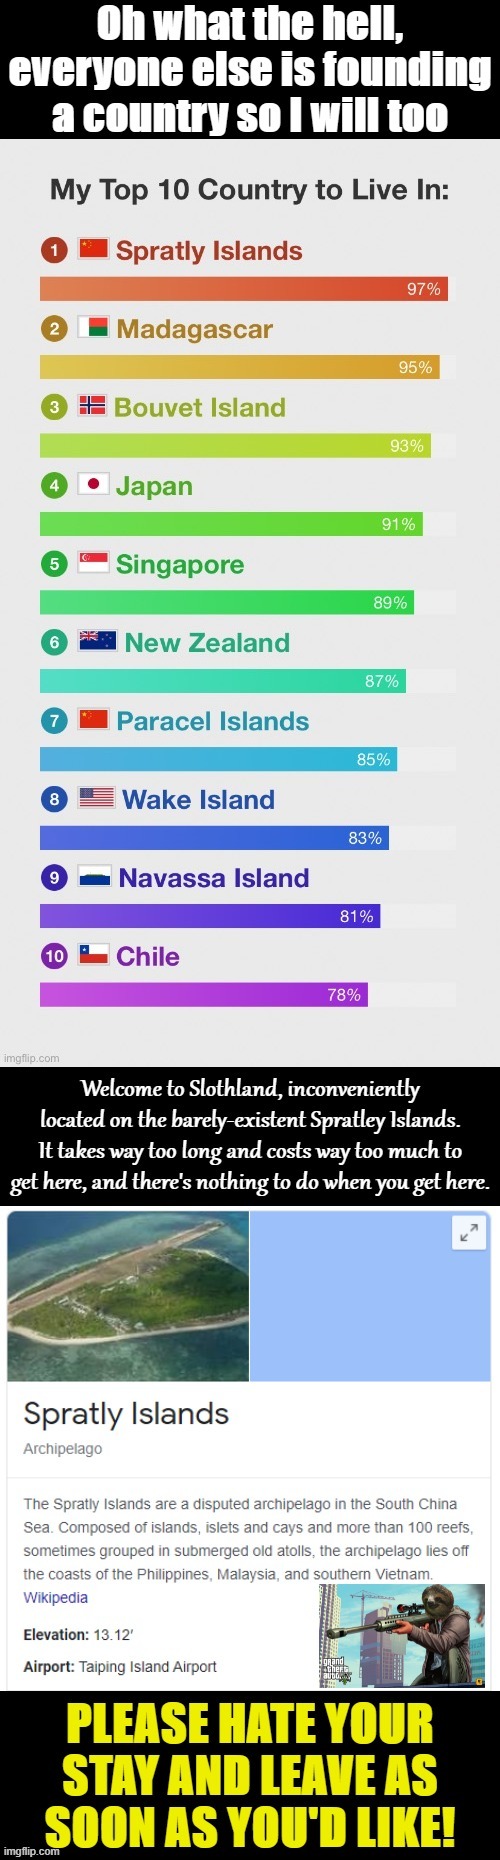 The Spratly Islands. Oh boy. | image tagged in spratly islands,spratly,islands,oh,boy,middle of nowhere | made w/ Imgflip meme maker